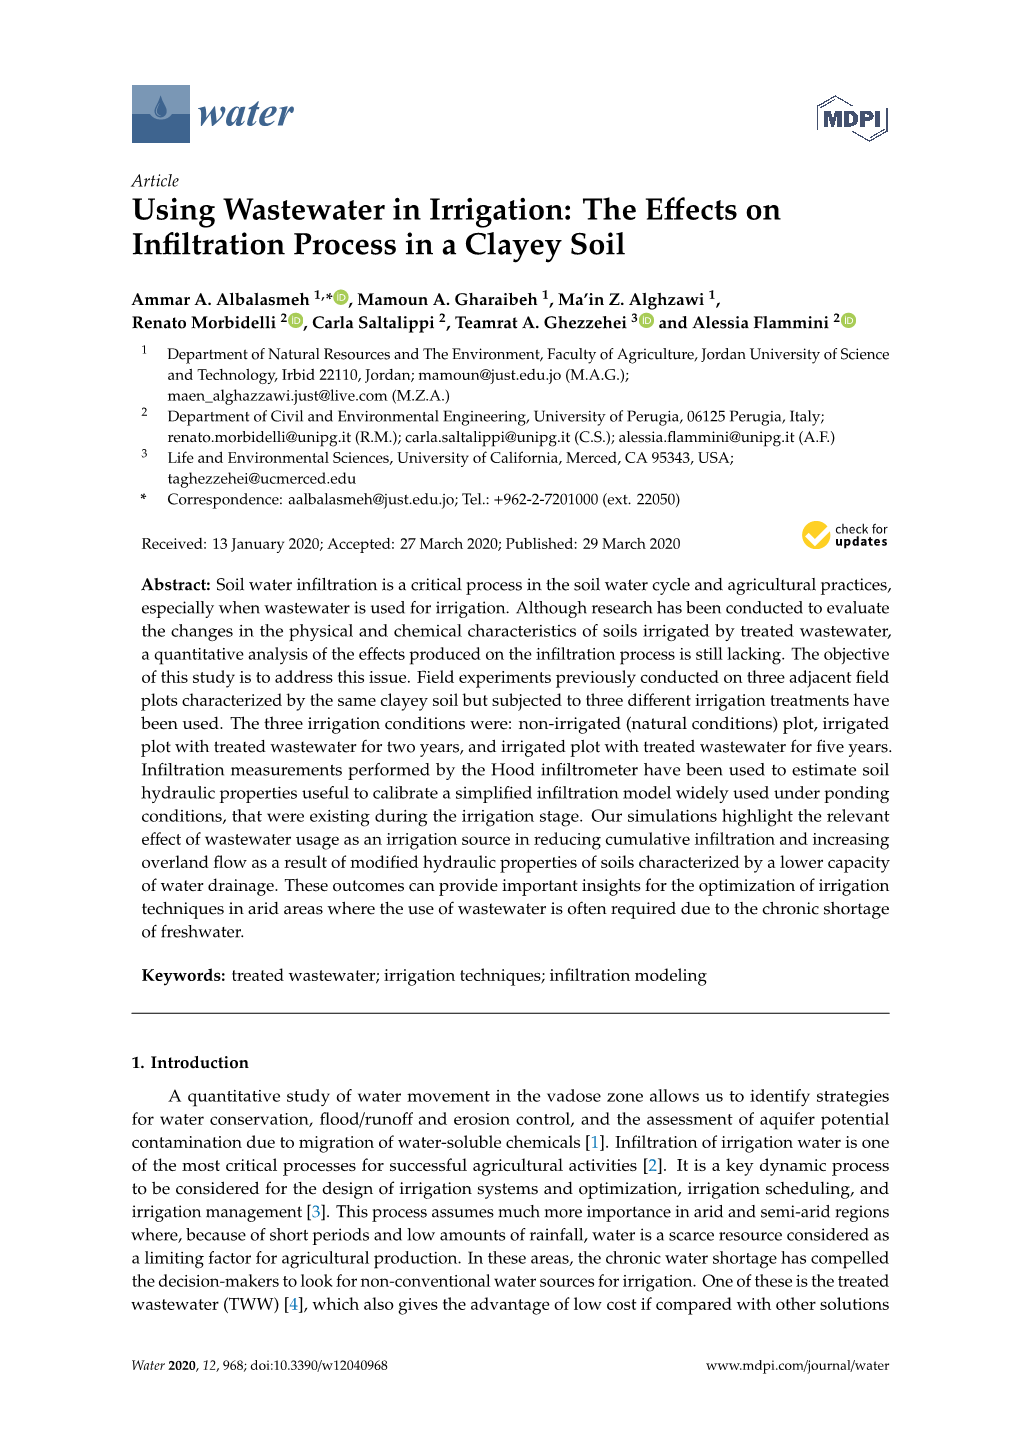 Using Wastewater in Irrigation: the Eﬀects on Inﬁltration Process in a Clayey Soil